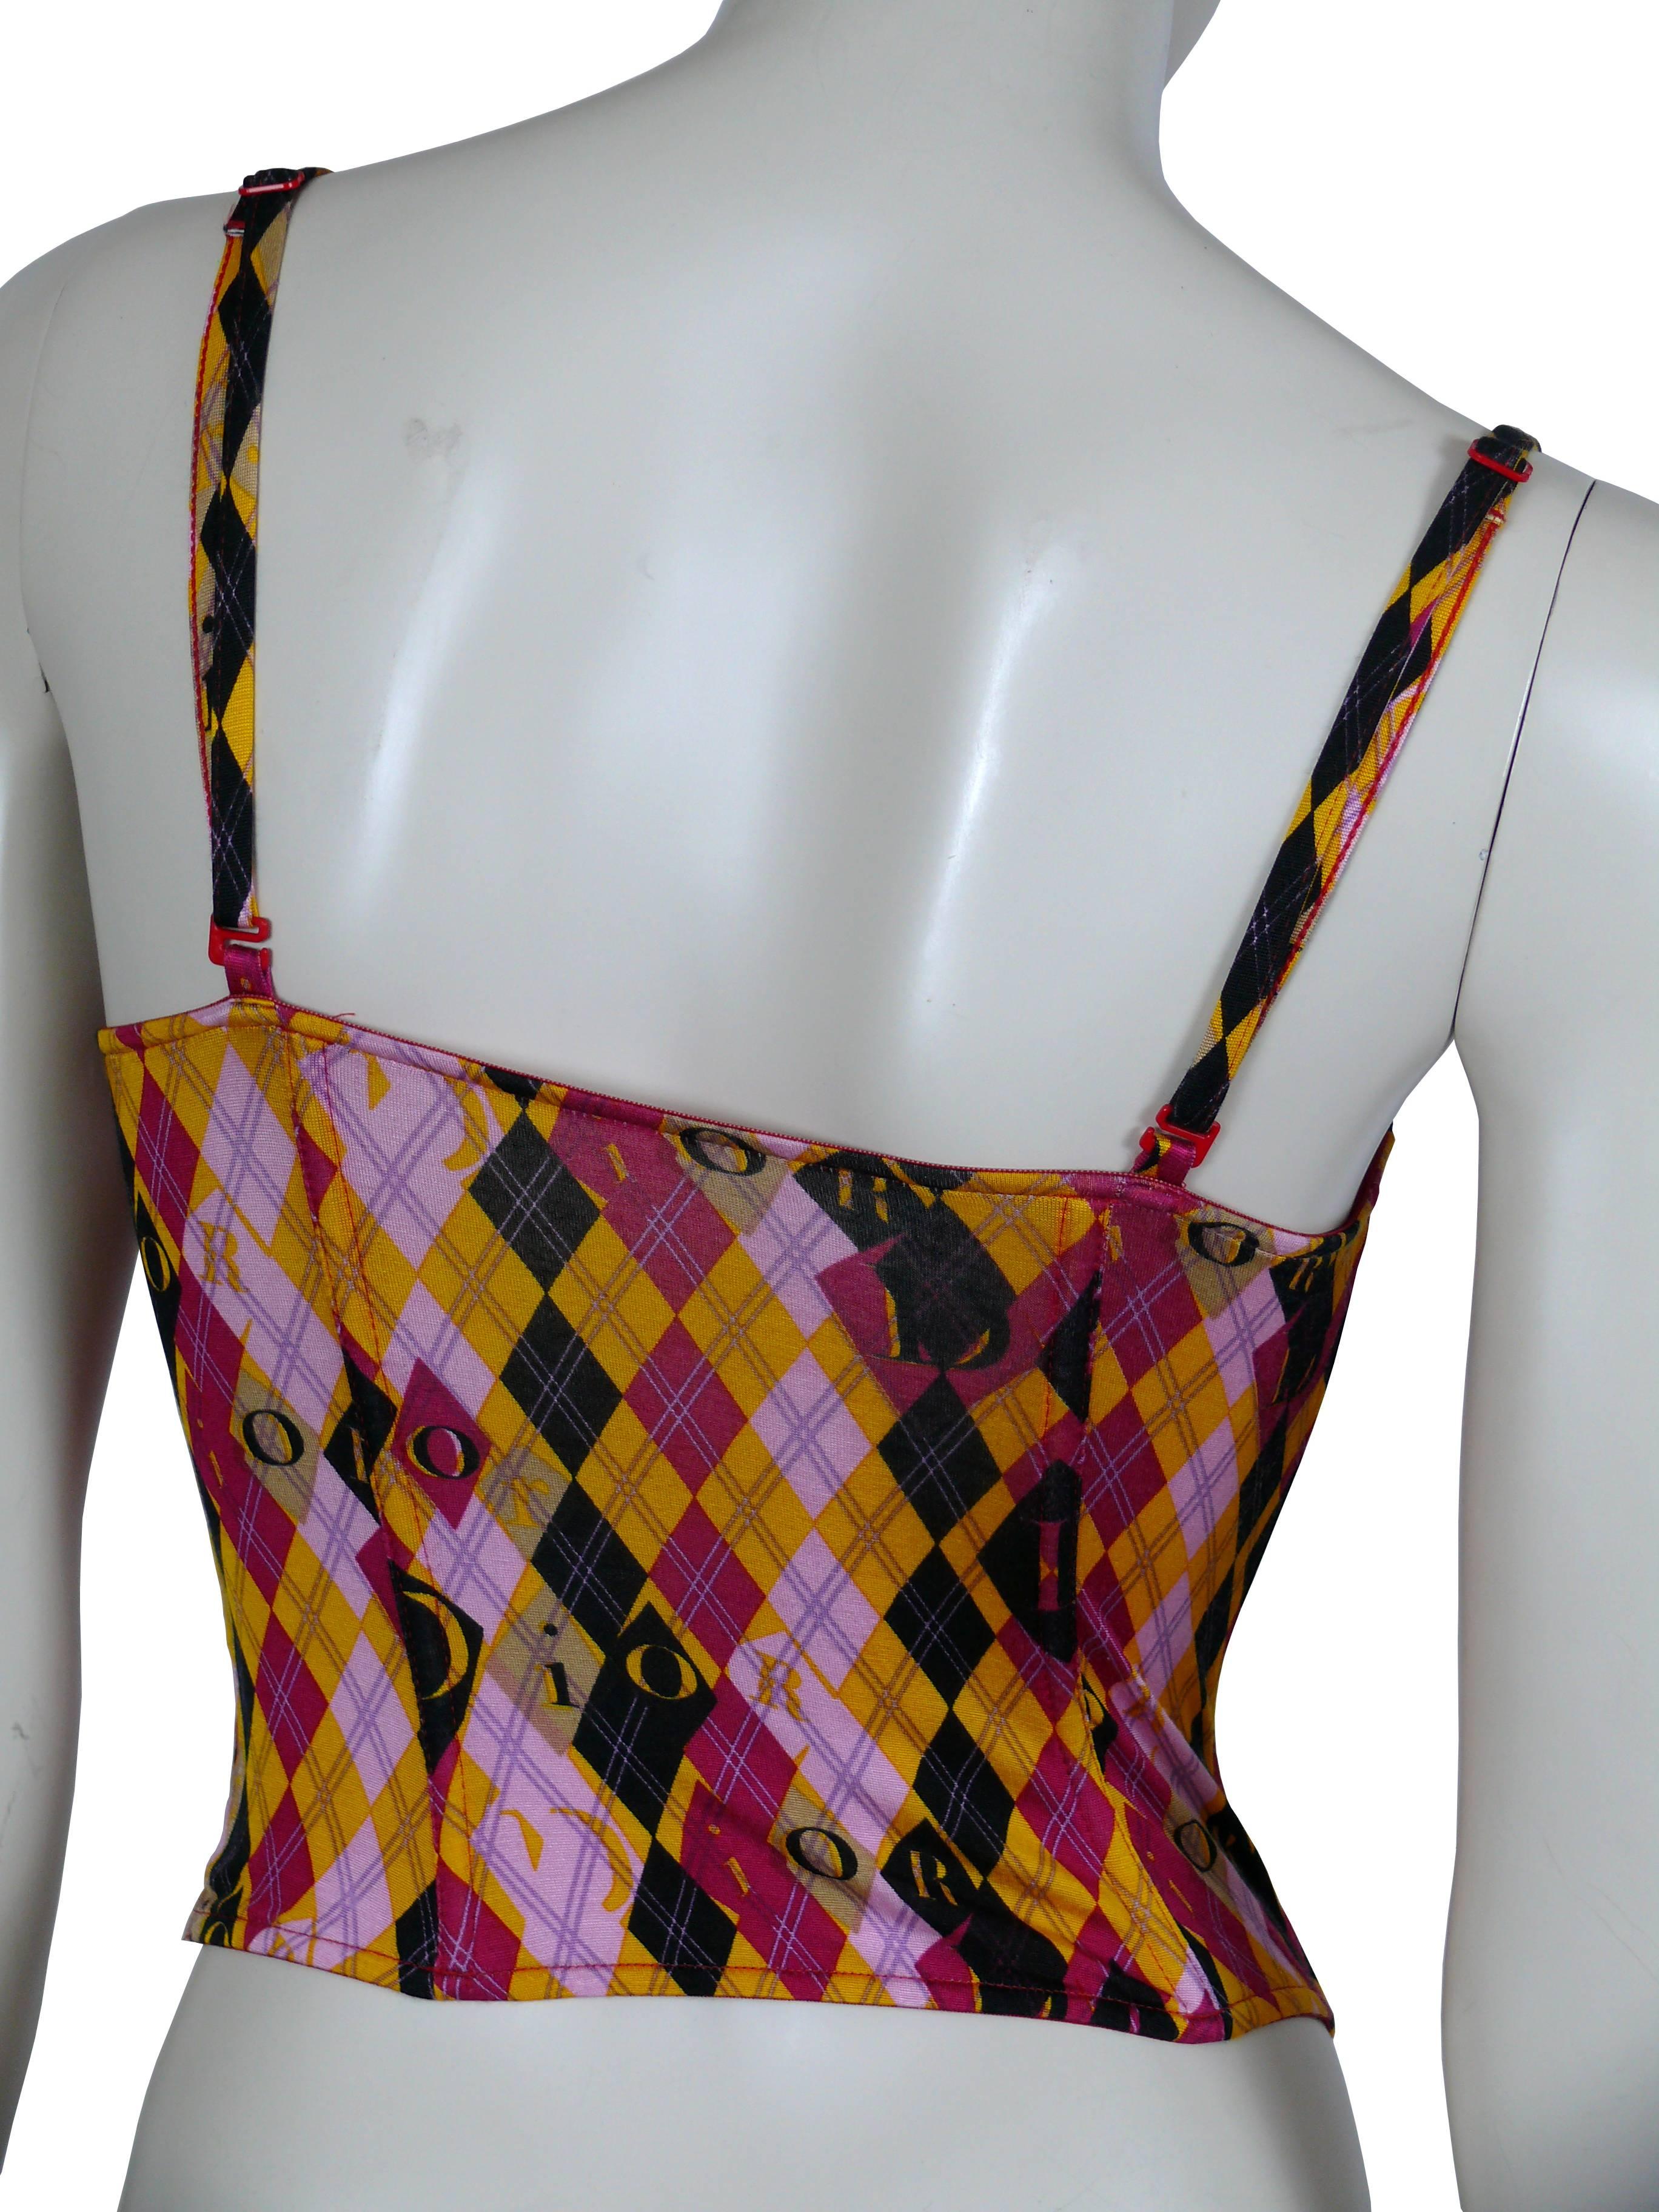 CHRISTIAN DIOR multicoloured Harlequin print bustier top.

New with tag.

Bow detail neckline.
Spaghetti straps.
Side fastening.

Label reads CHRISTIAN DIOR Made in Italy.

Marked Size: FR 85 / EUR 70 / UK 34 / US 32.
Bra FR sizing : 85